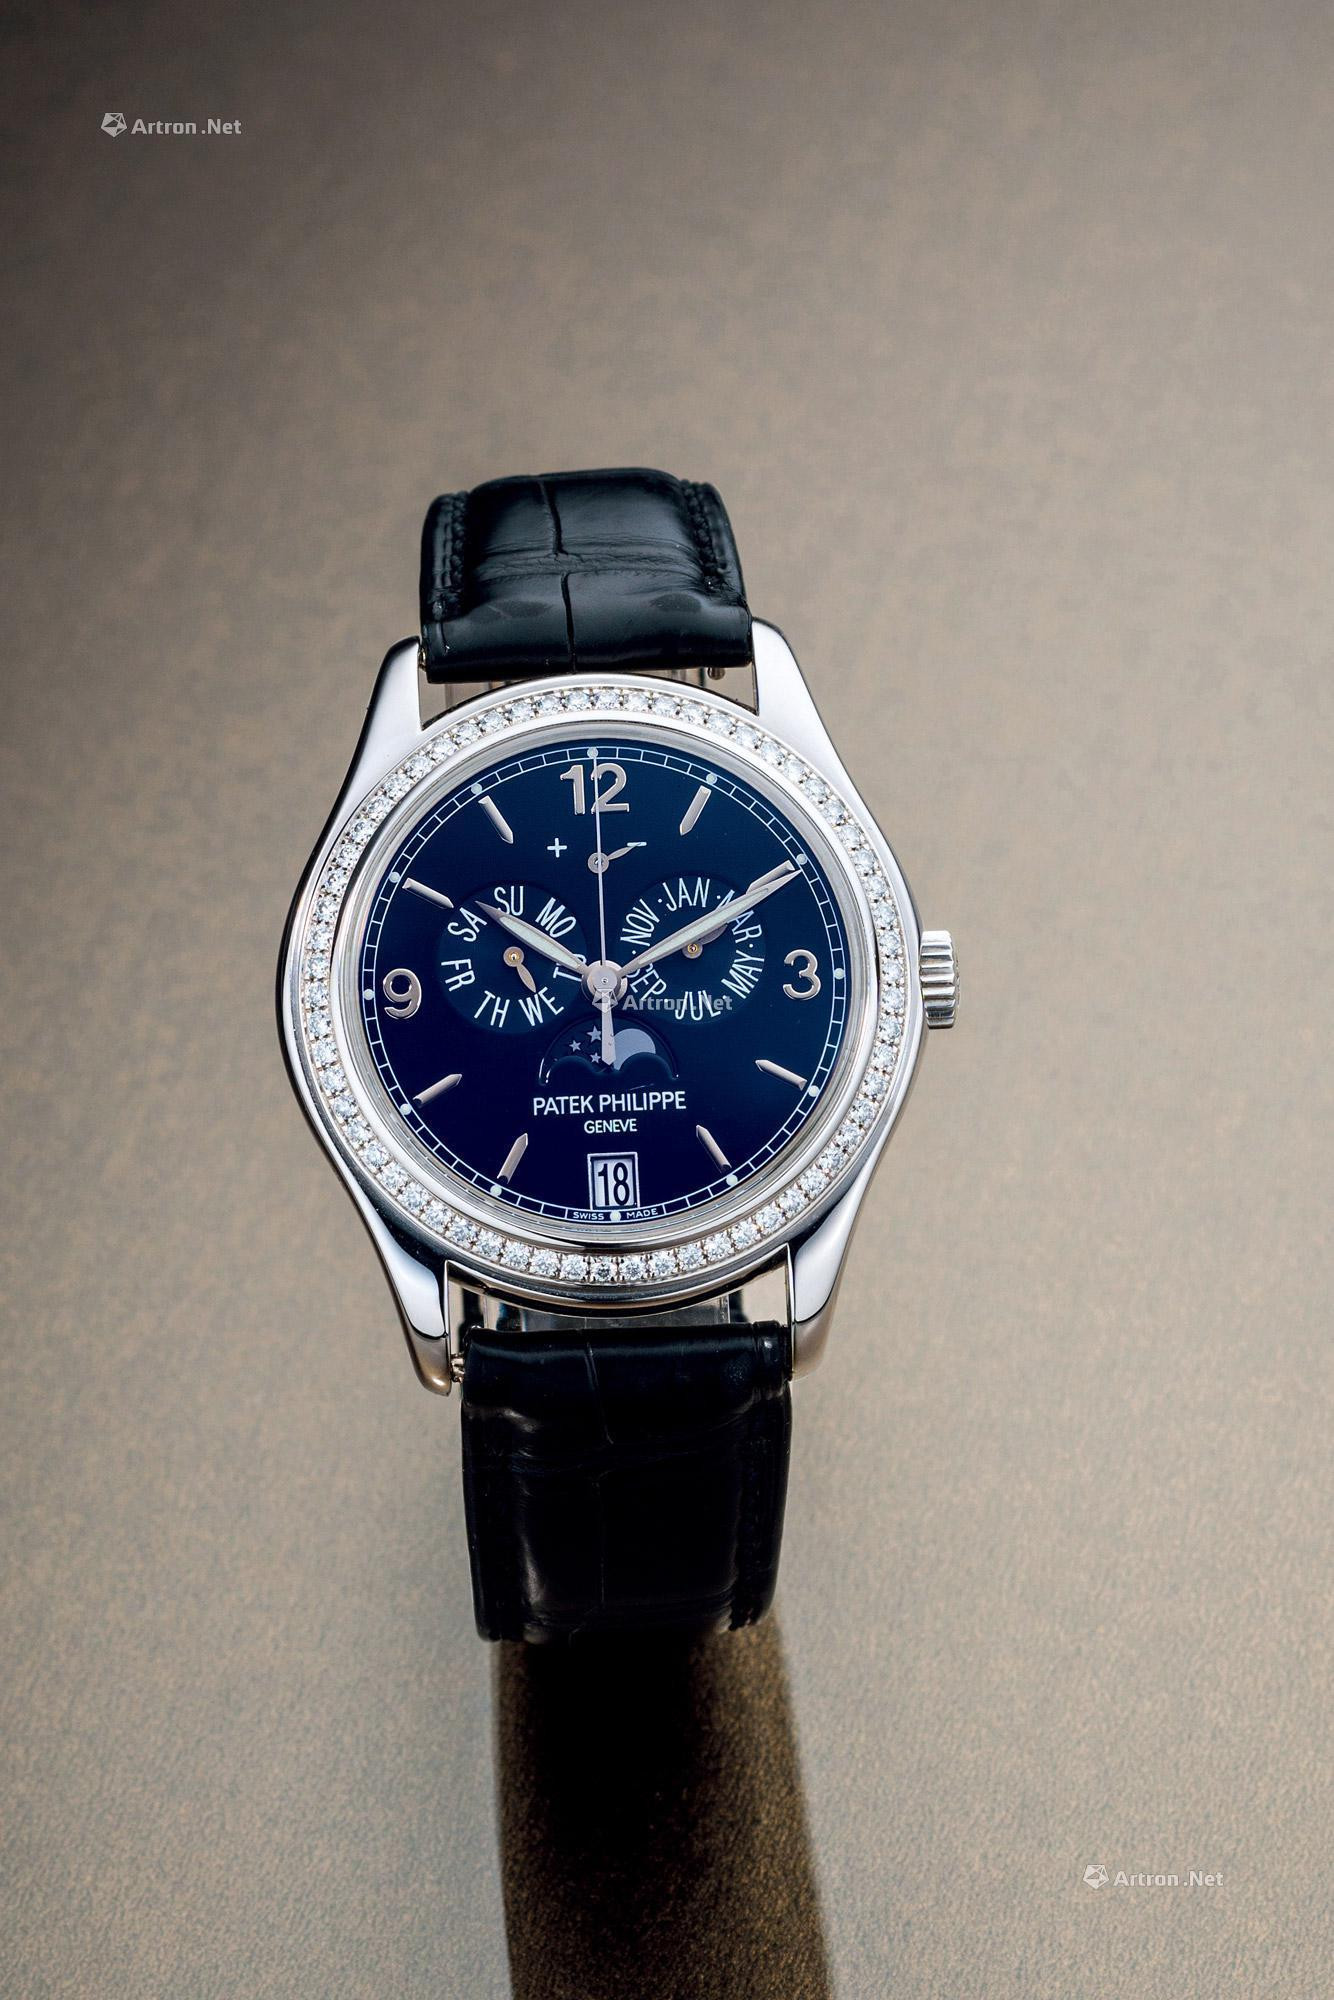 PATEK PHILIPPE  A FINE WHITE GOLD AND DIAMOND-SET ANNUAL CALENDAR AUTOMATIC WRISTWATCH， WITH DATE， DAY， MONTH， MOON PHASES AND POWER RESERVE INDICATORS， EXTRACT FROM THE ARCHIVES